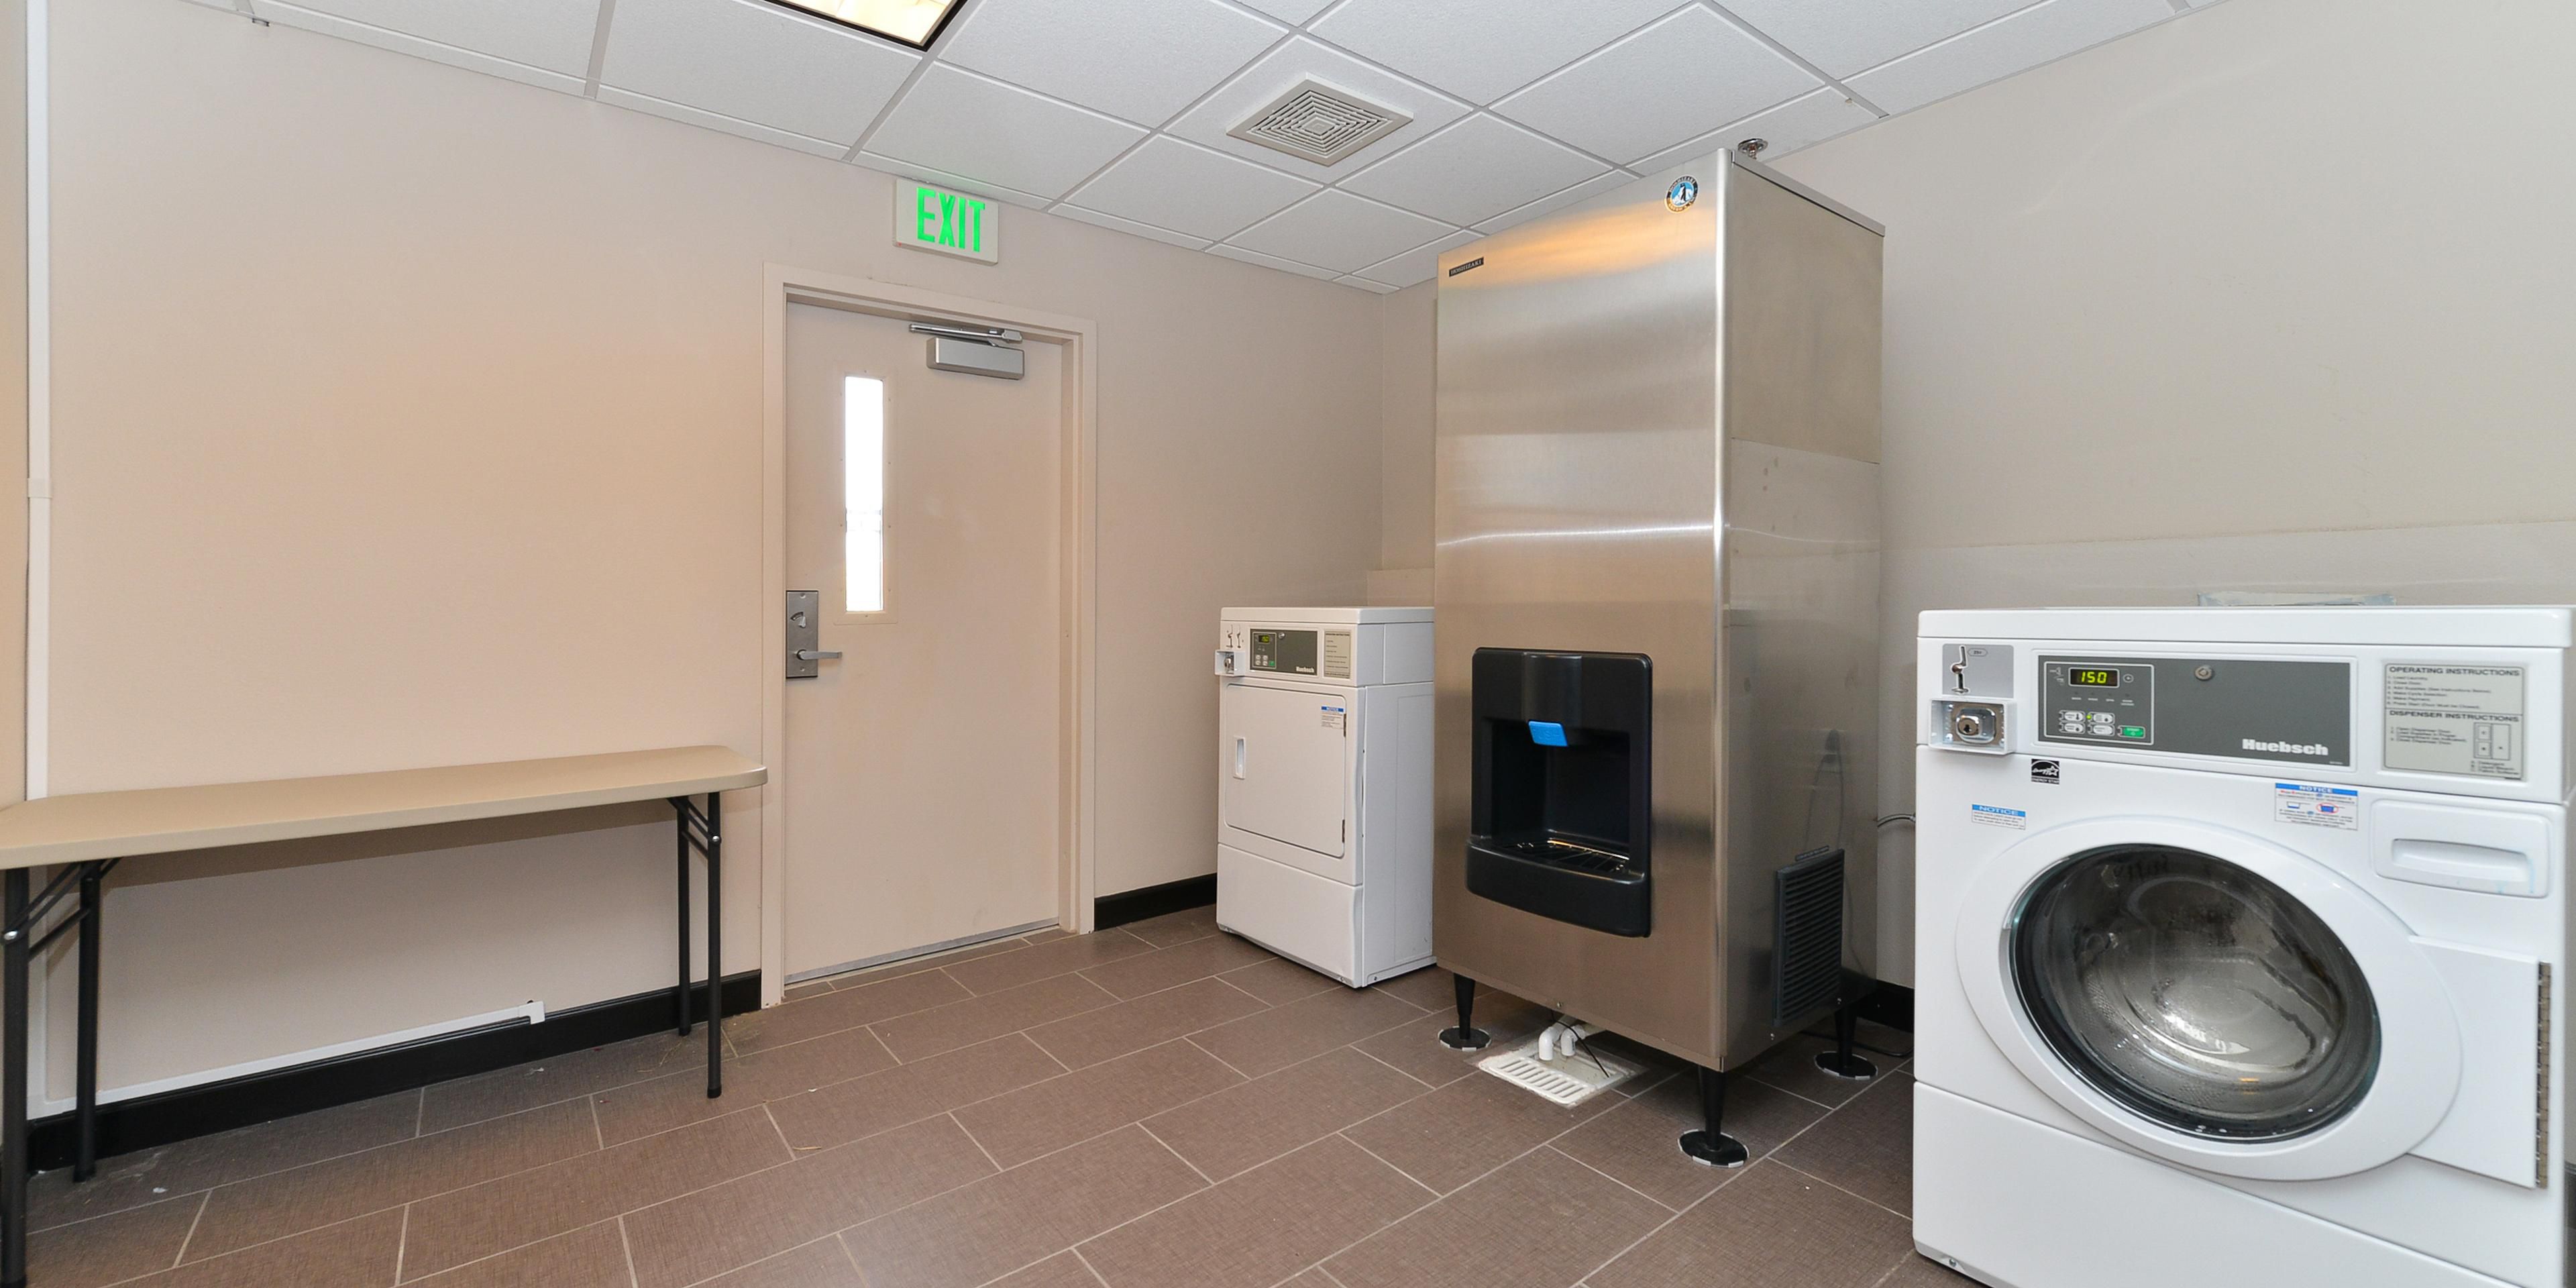 The Holiday Inn Express and Suites Indio offers self-service, coin operated, guest laundry.